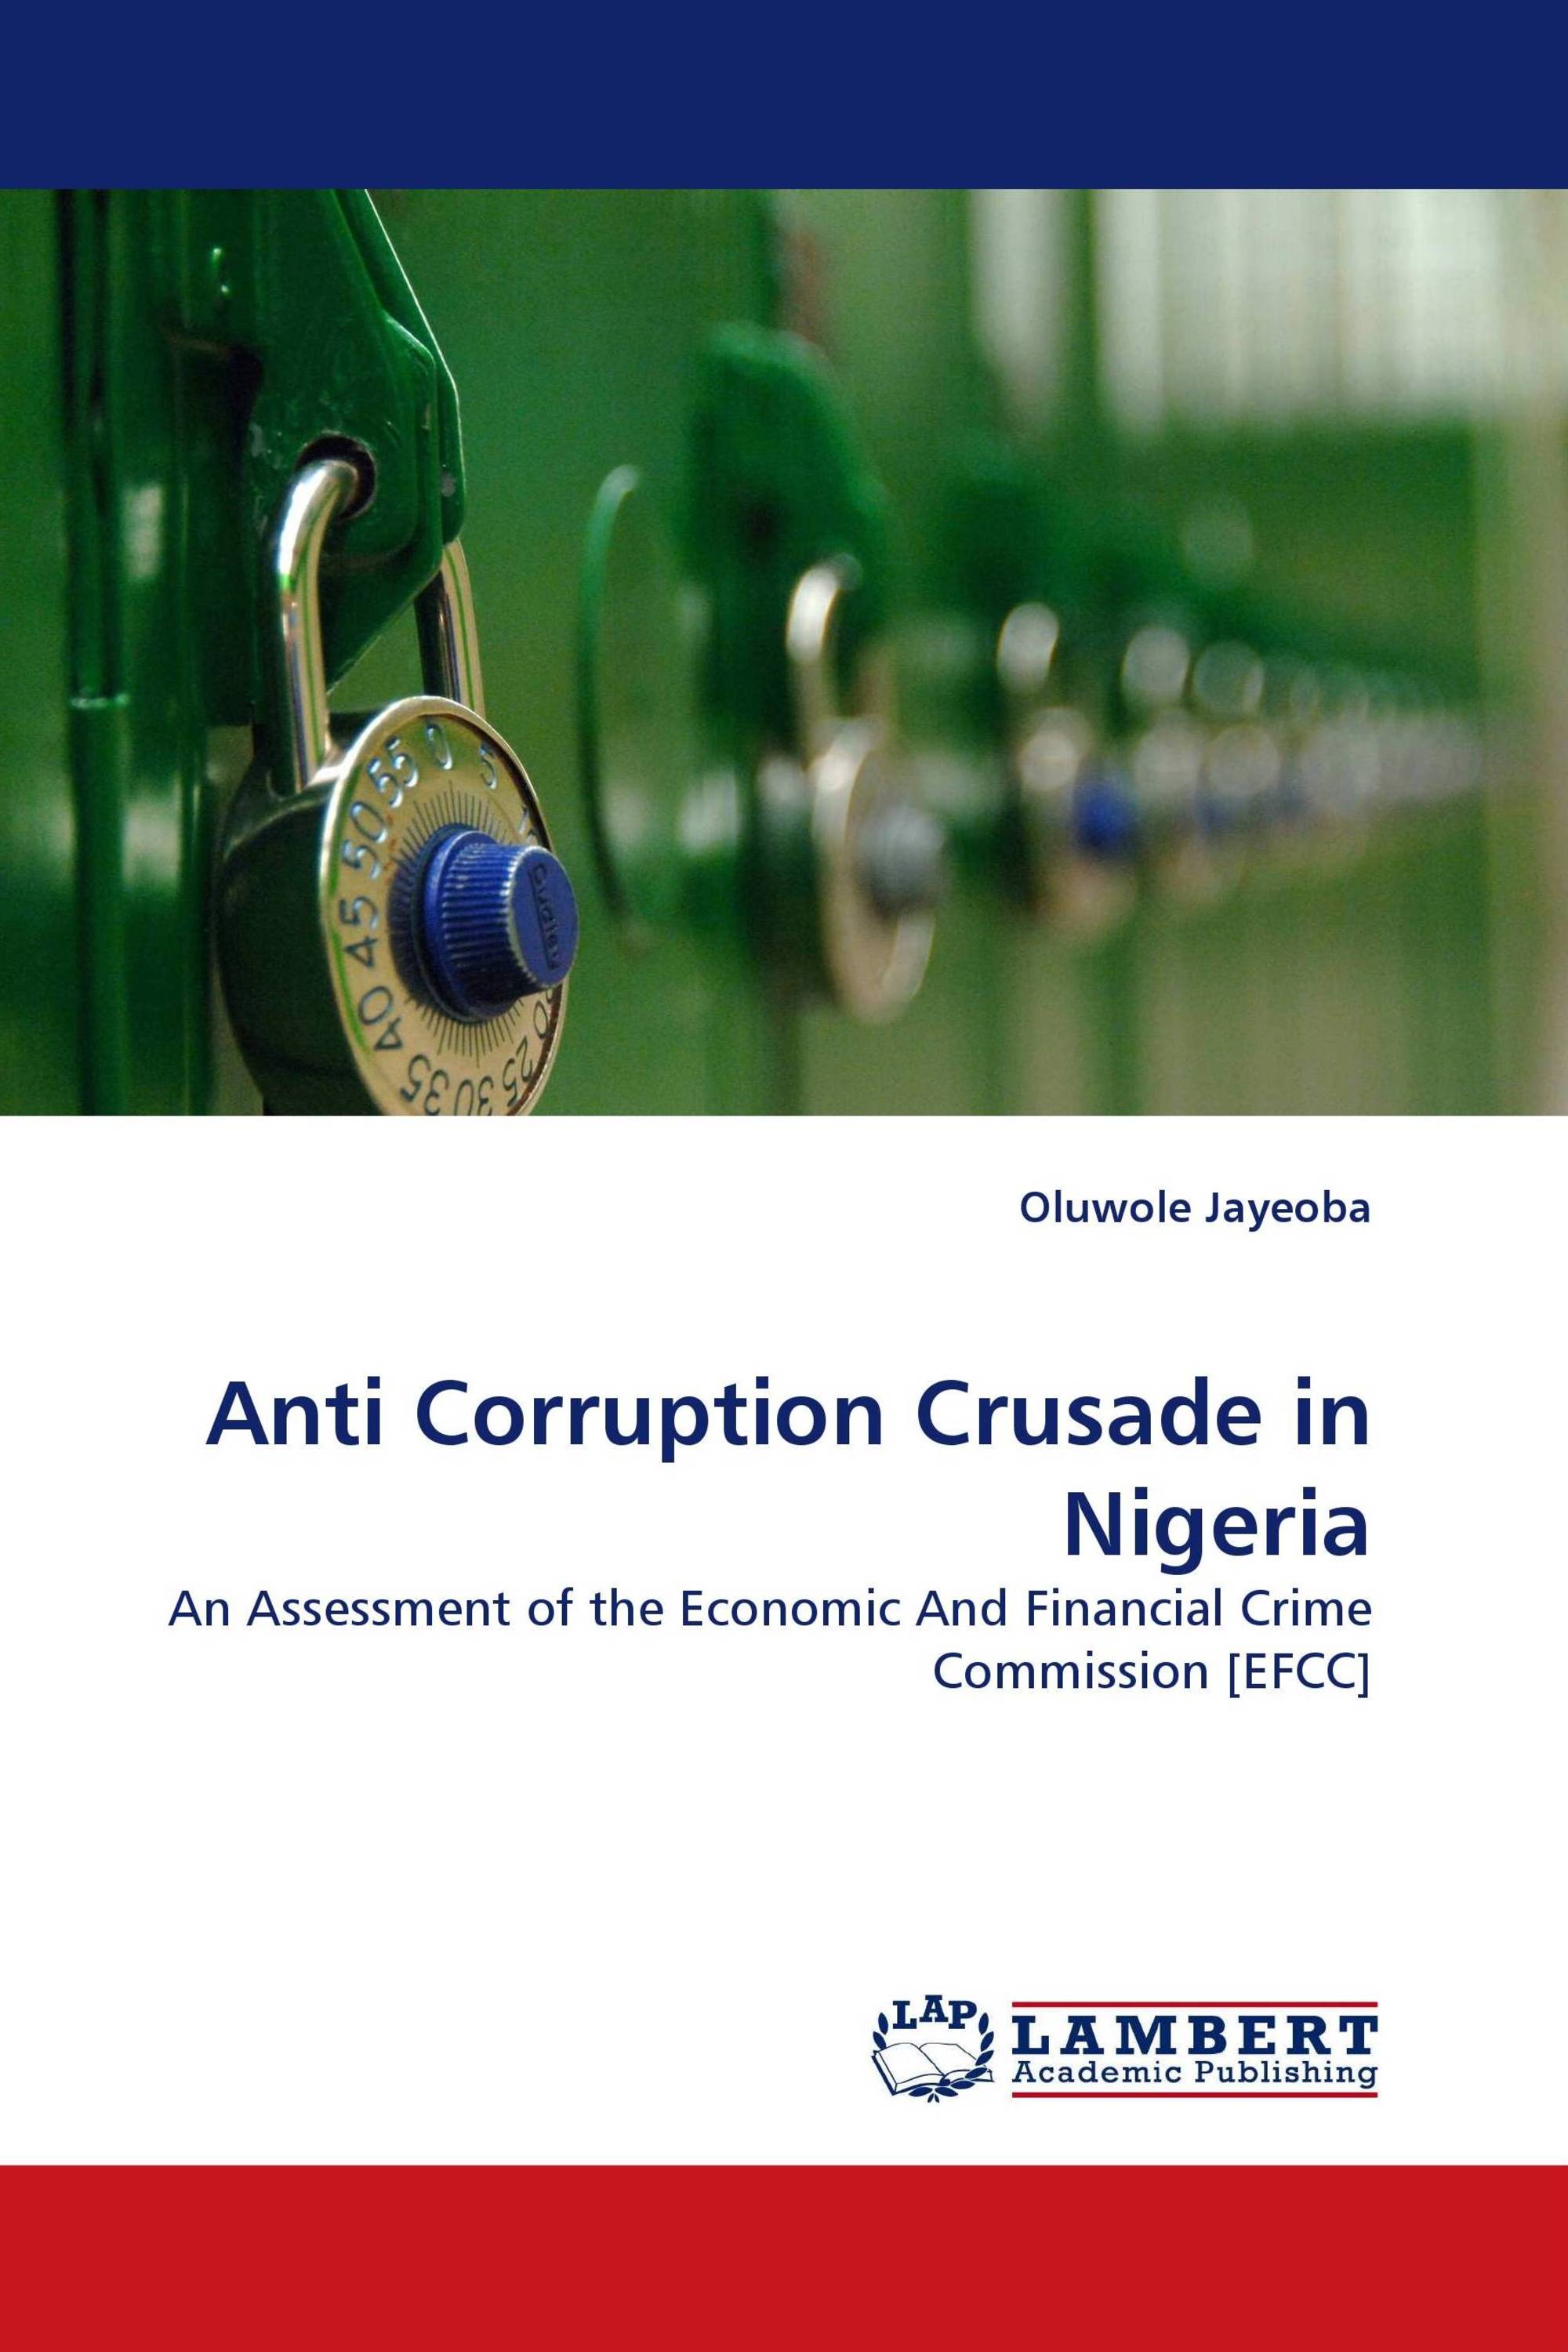 essay on how to stop corruption in nigeria